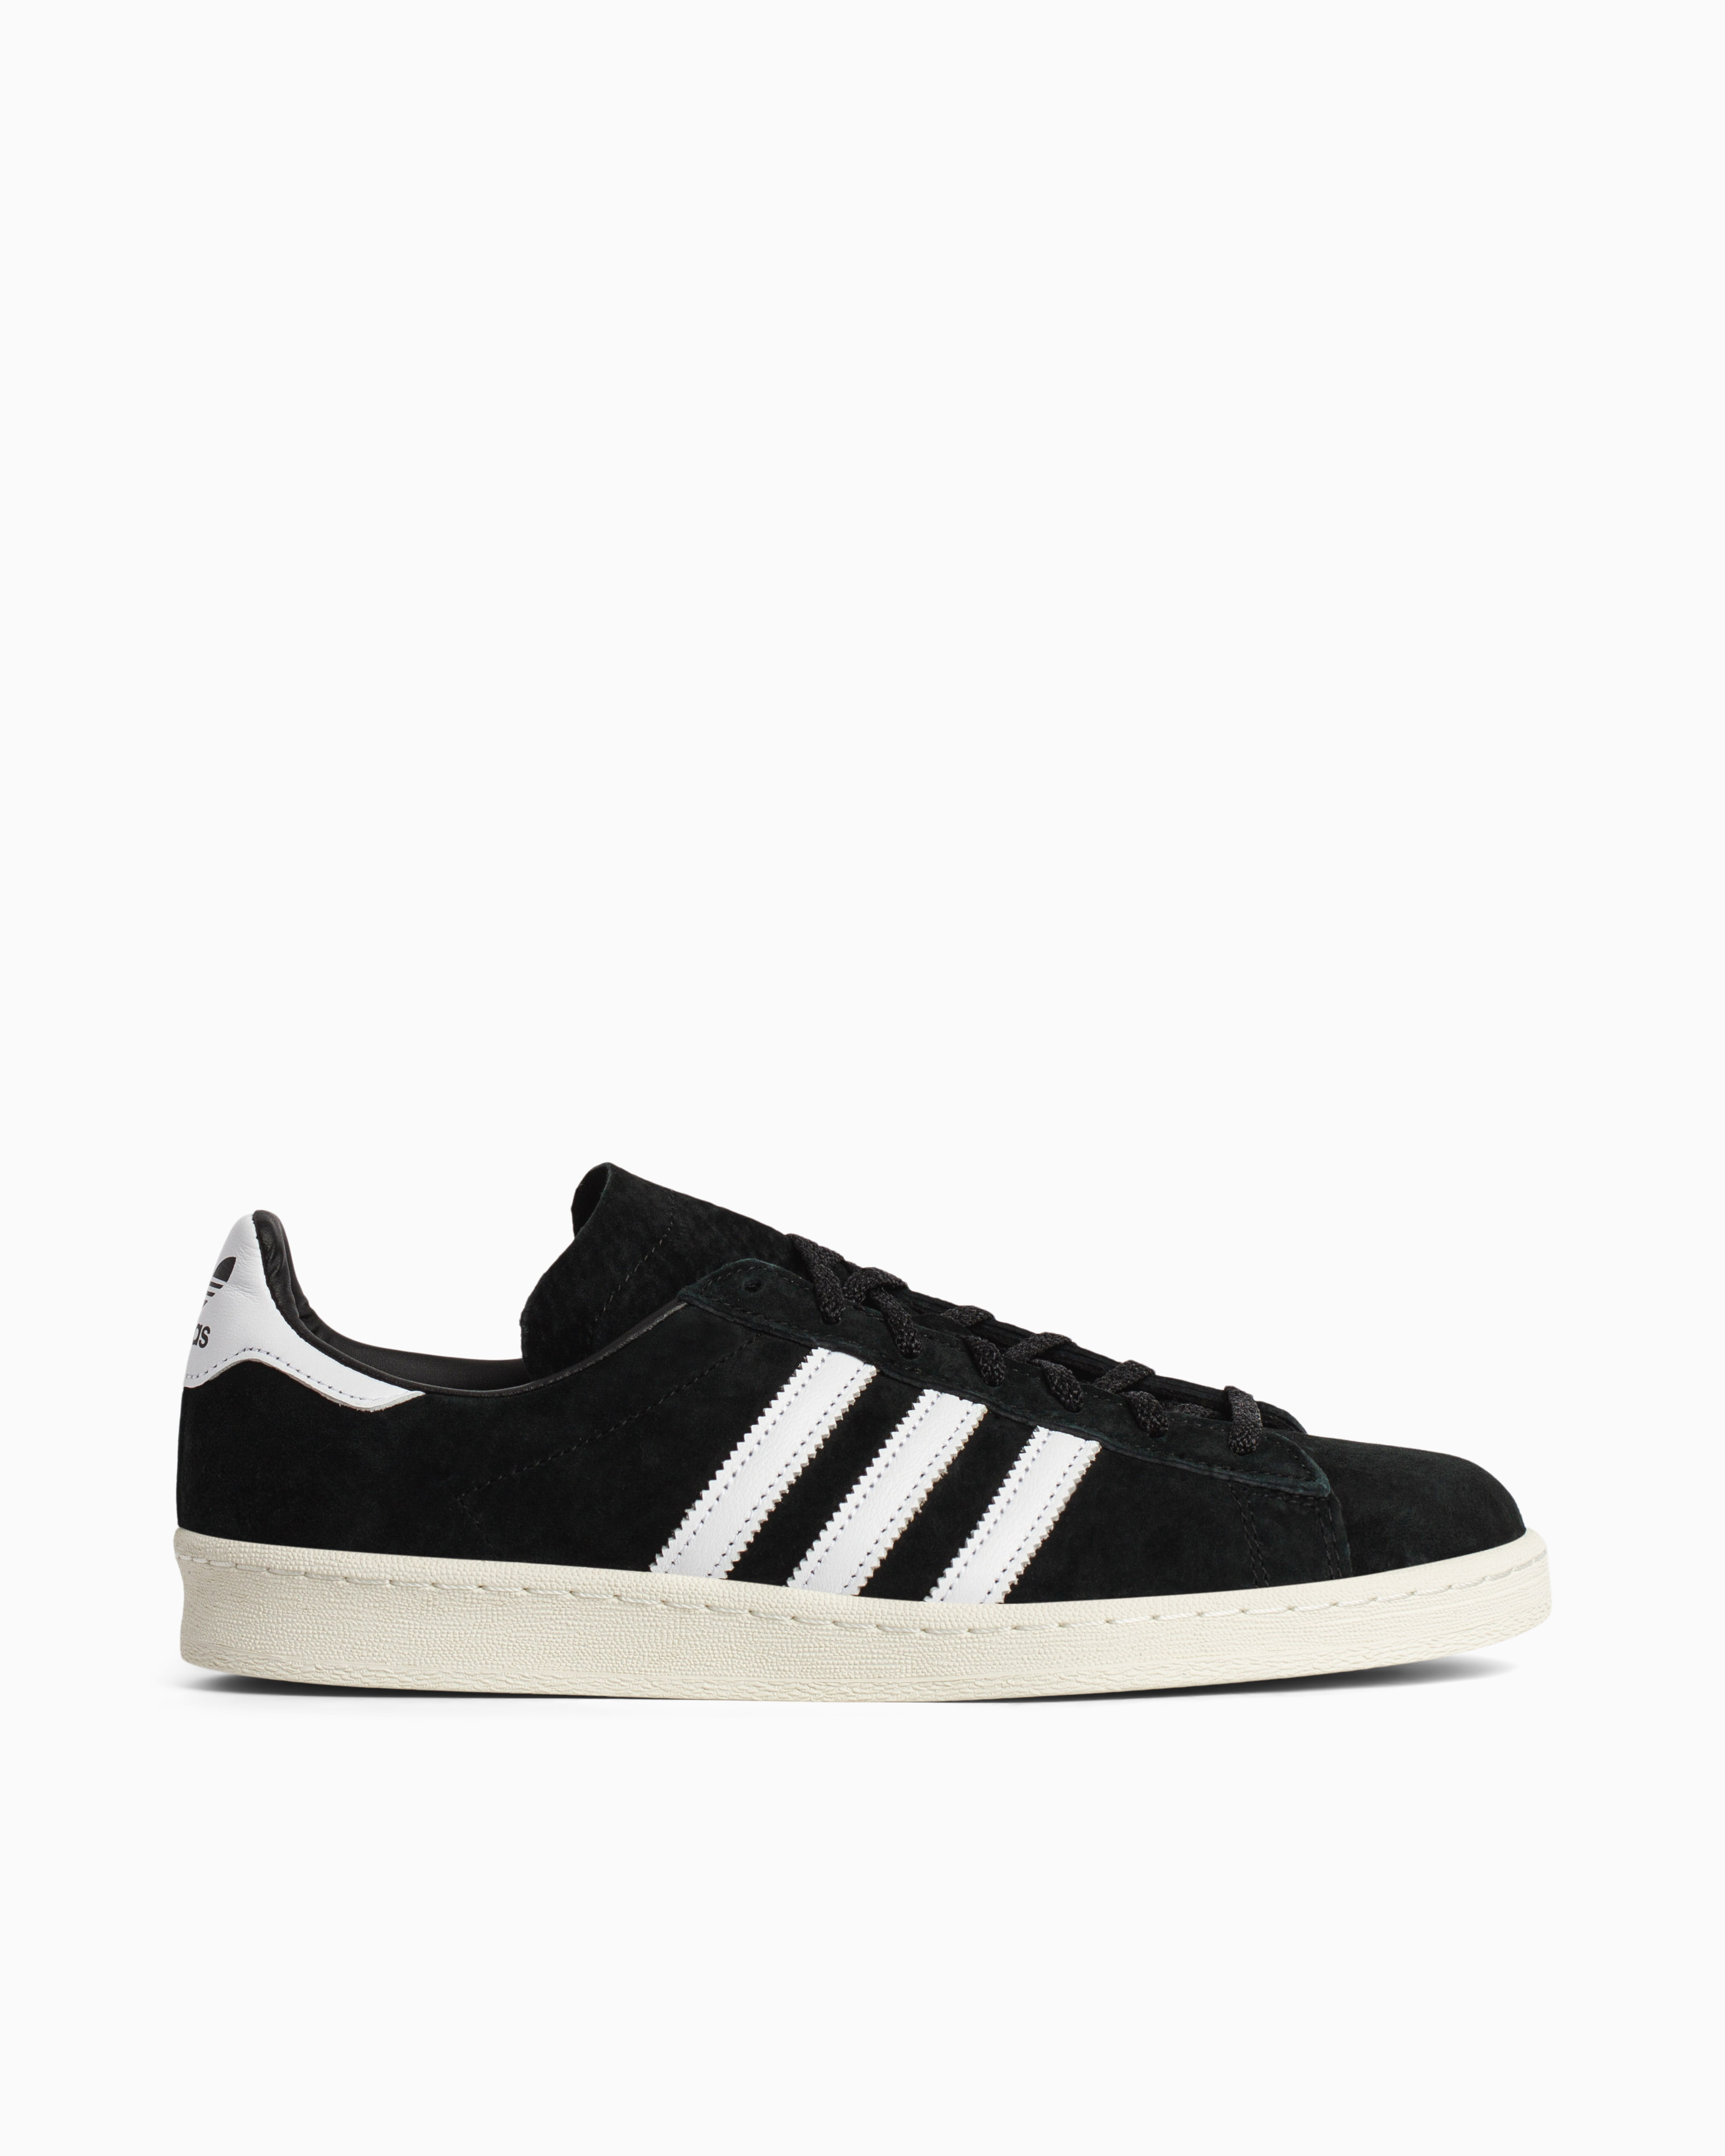 Campus 80s by adidas